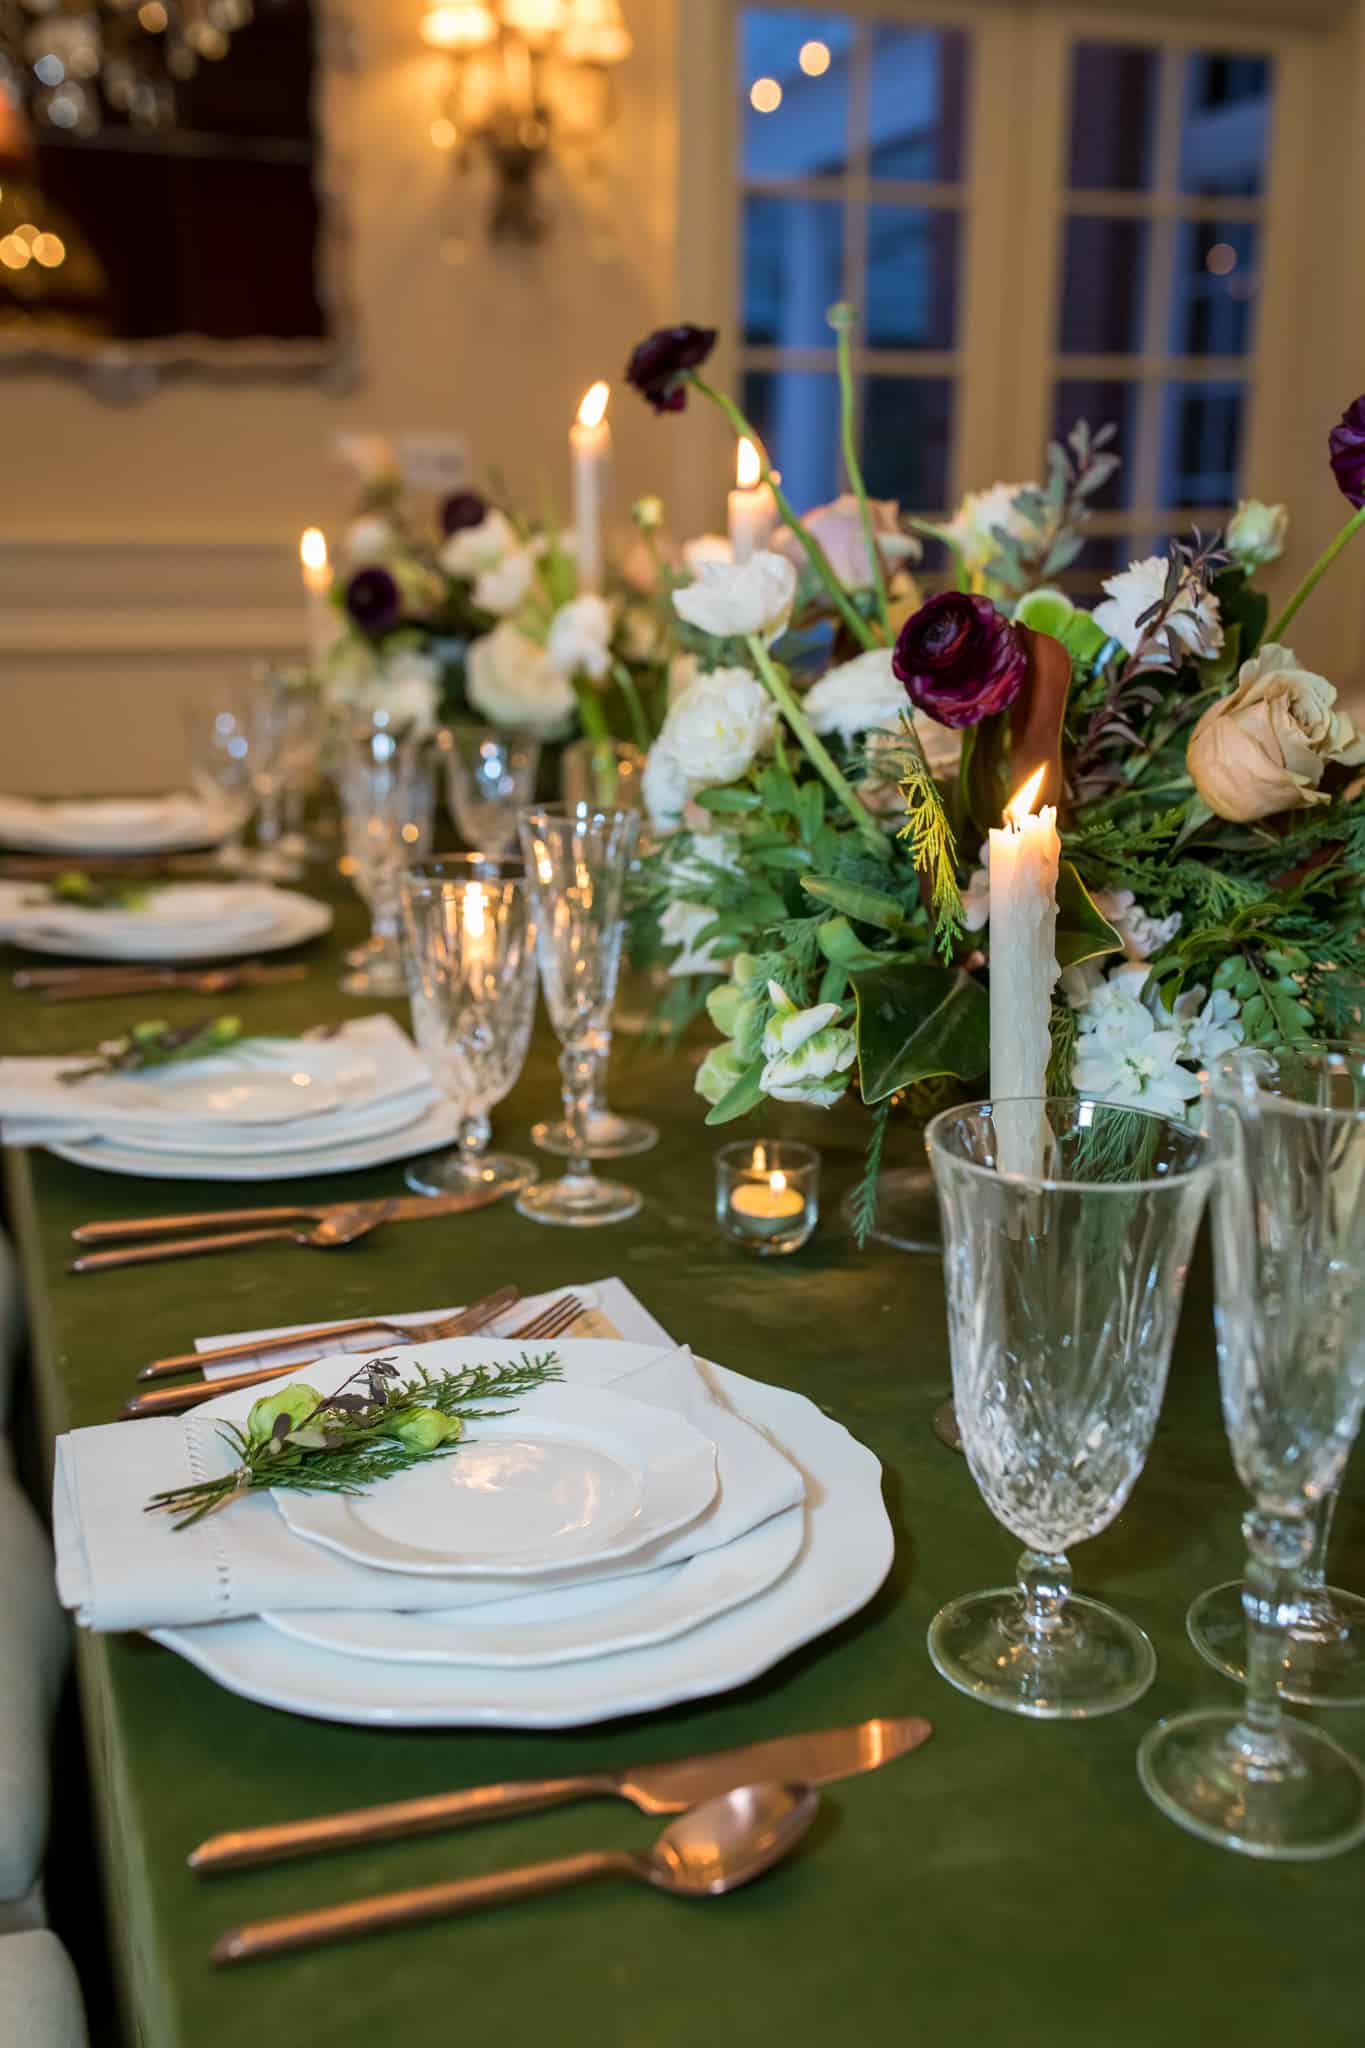 winter wedding ideas and decor with a table setting of white plates, tall candles and elegant floral arrangements